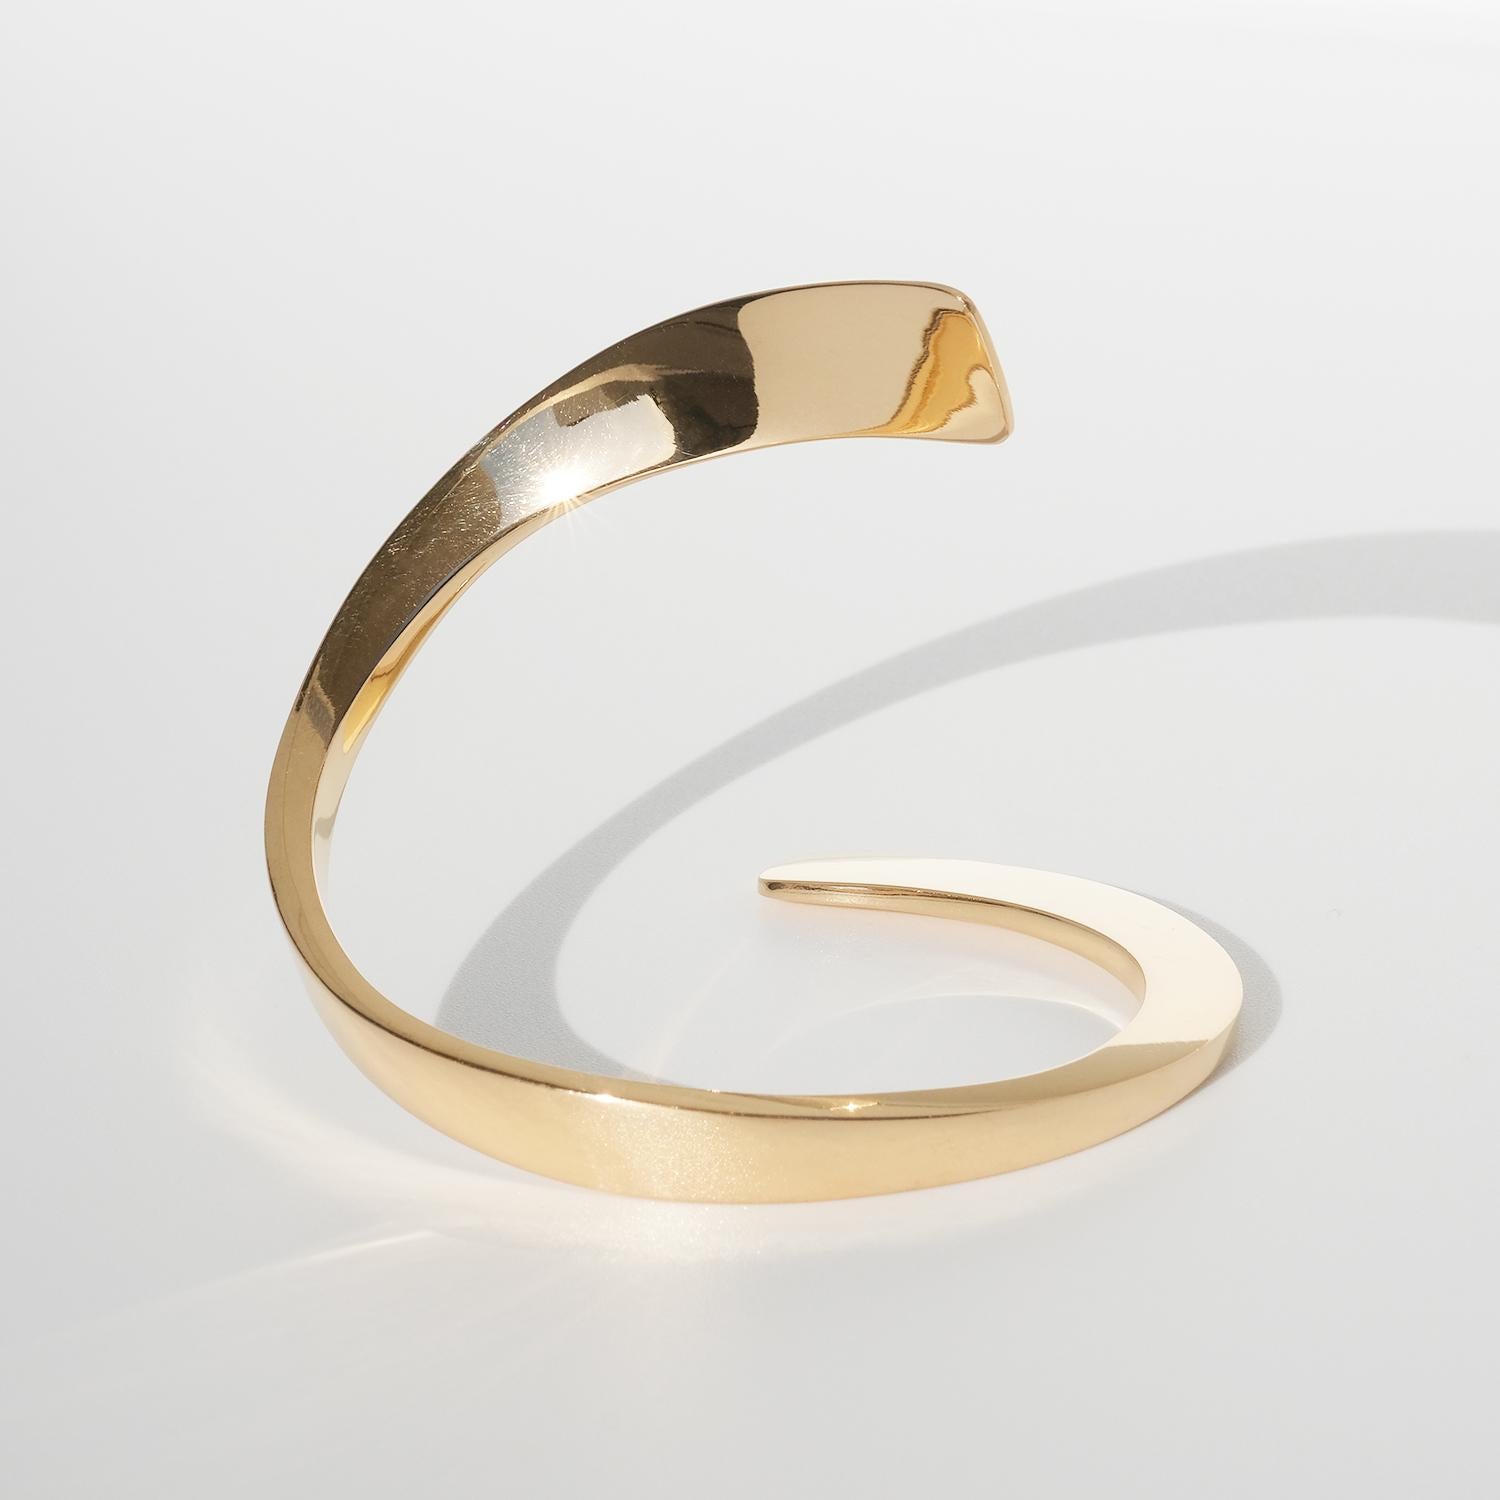 This cuff bracelet is made out of solid 18 karat gold and with that it has a beautiful shiny golden surface. Its arms embrace the wrist in such an exquisite and obvious way that it might be difficult to separate yourself from it once it's in